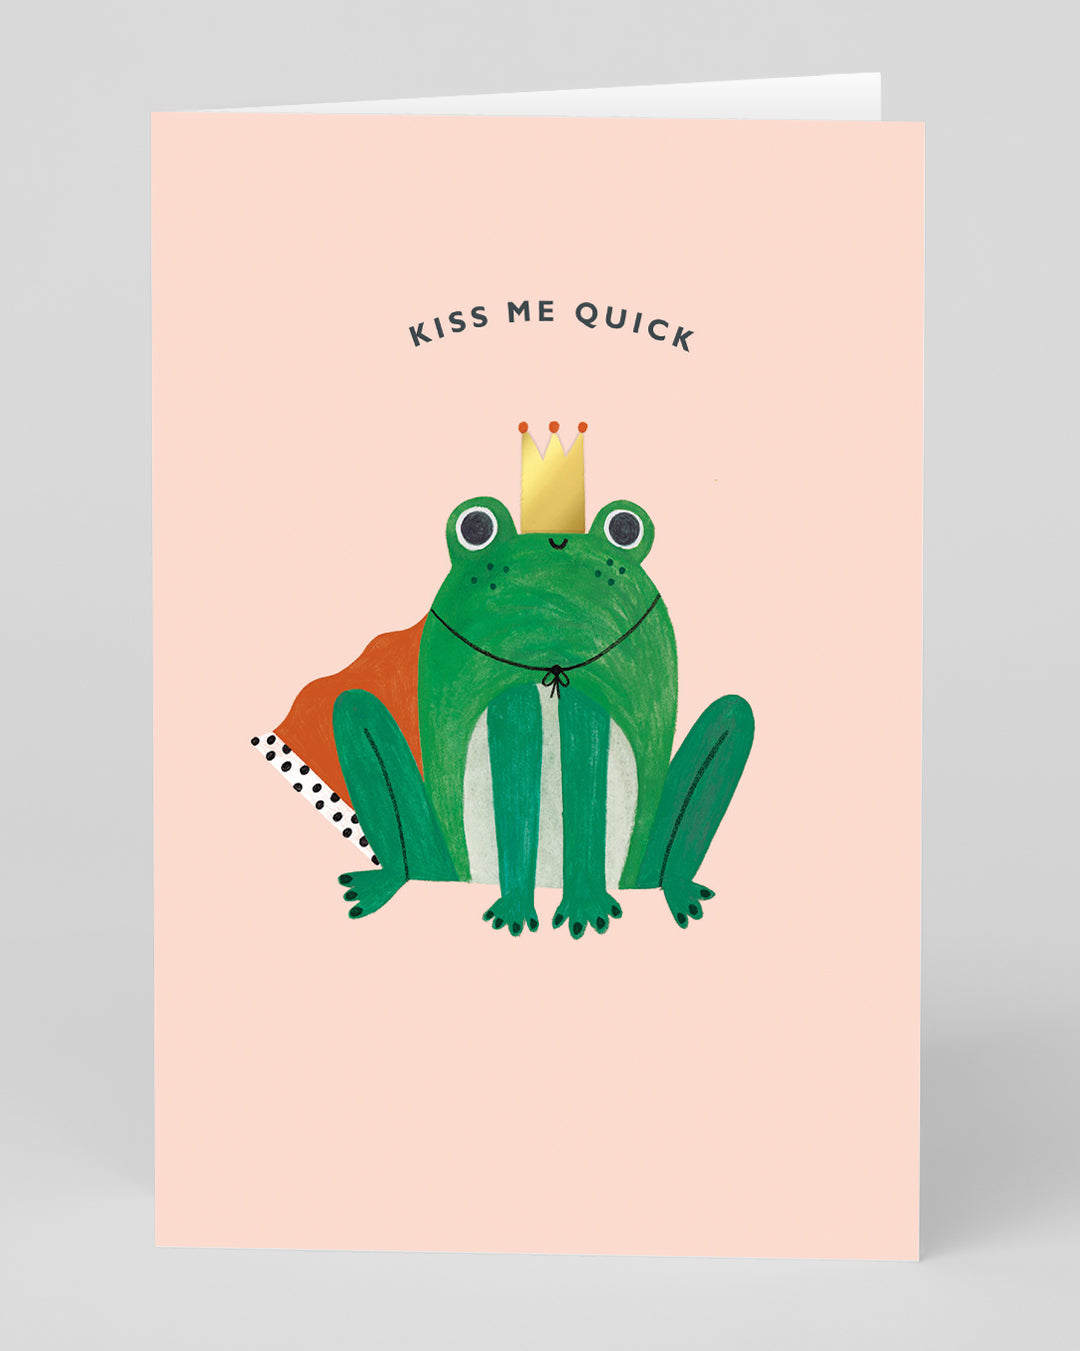 Valentine’s Day | Valentines Card For Him or Her | Personalised Kiss Me Quick Greeting Card | Ohh Deer Unique Valentine’s Card | Made In The UK, Eco-Friendly Materials, Plastic Free Packaging